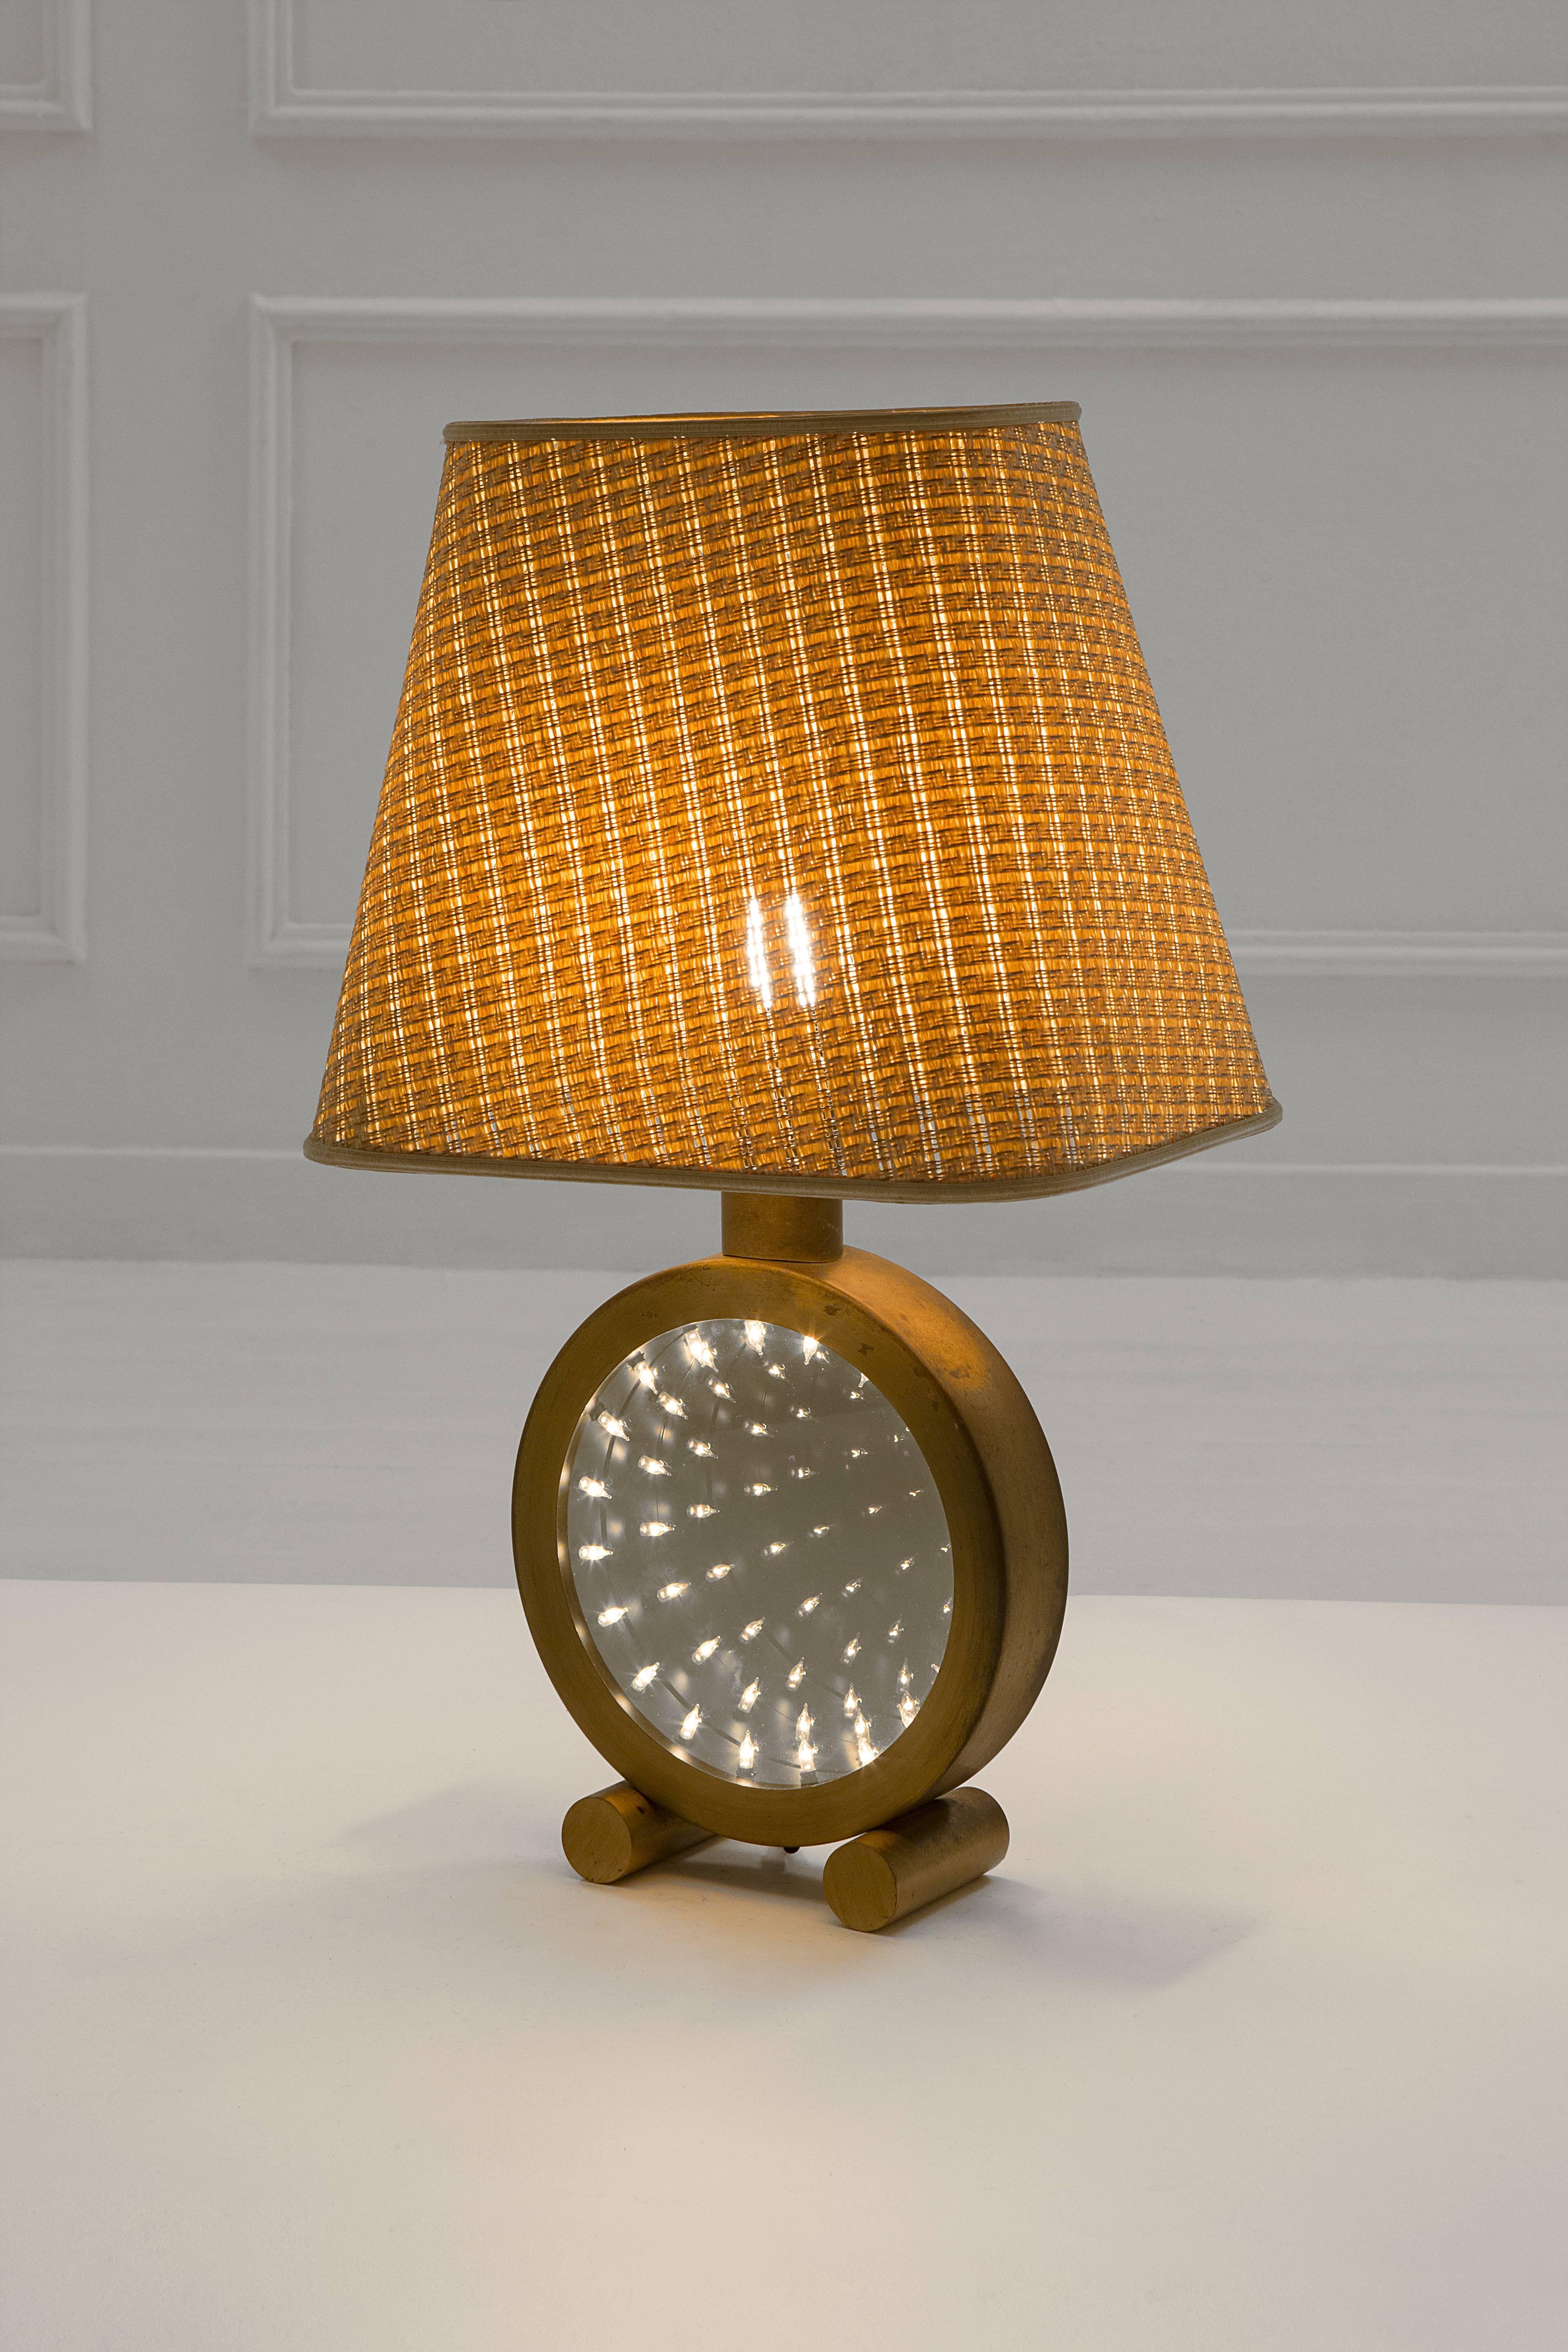 Table lamp,
polished brass and glass,
circa 1970, Italy.
Measures: Height 60 cm, diameter 35 cm.